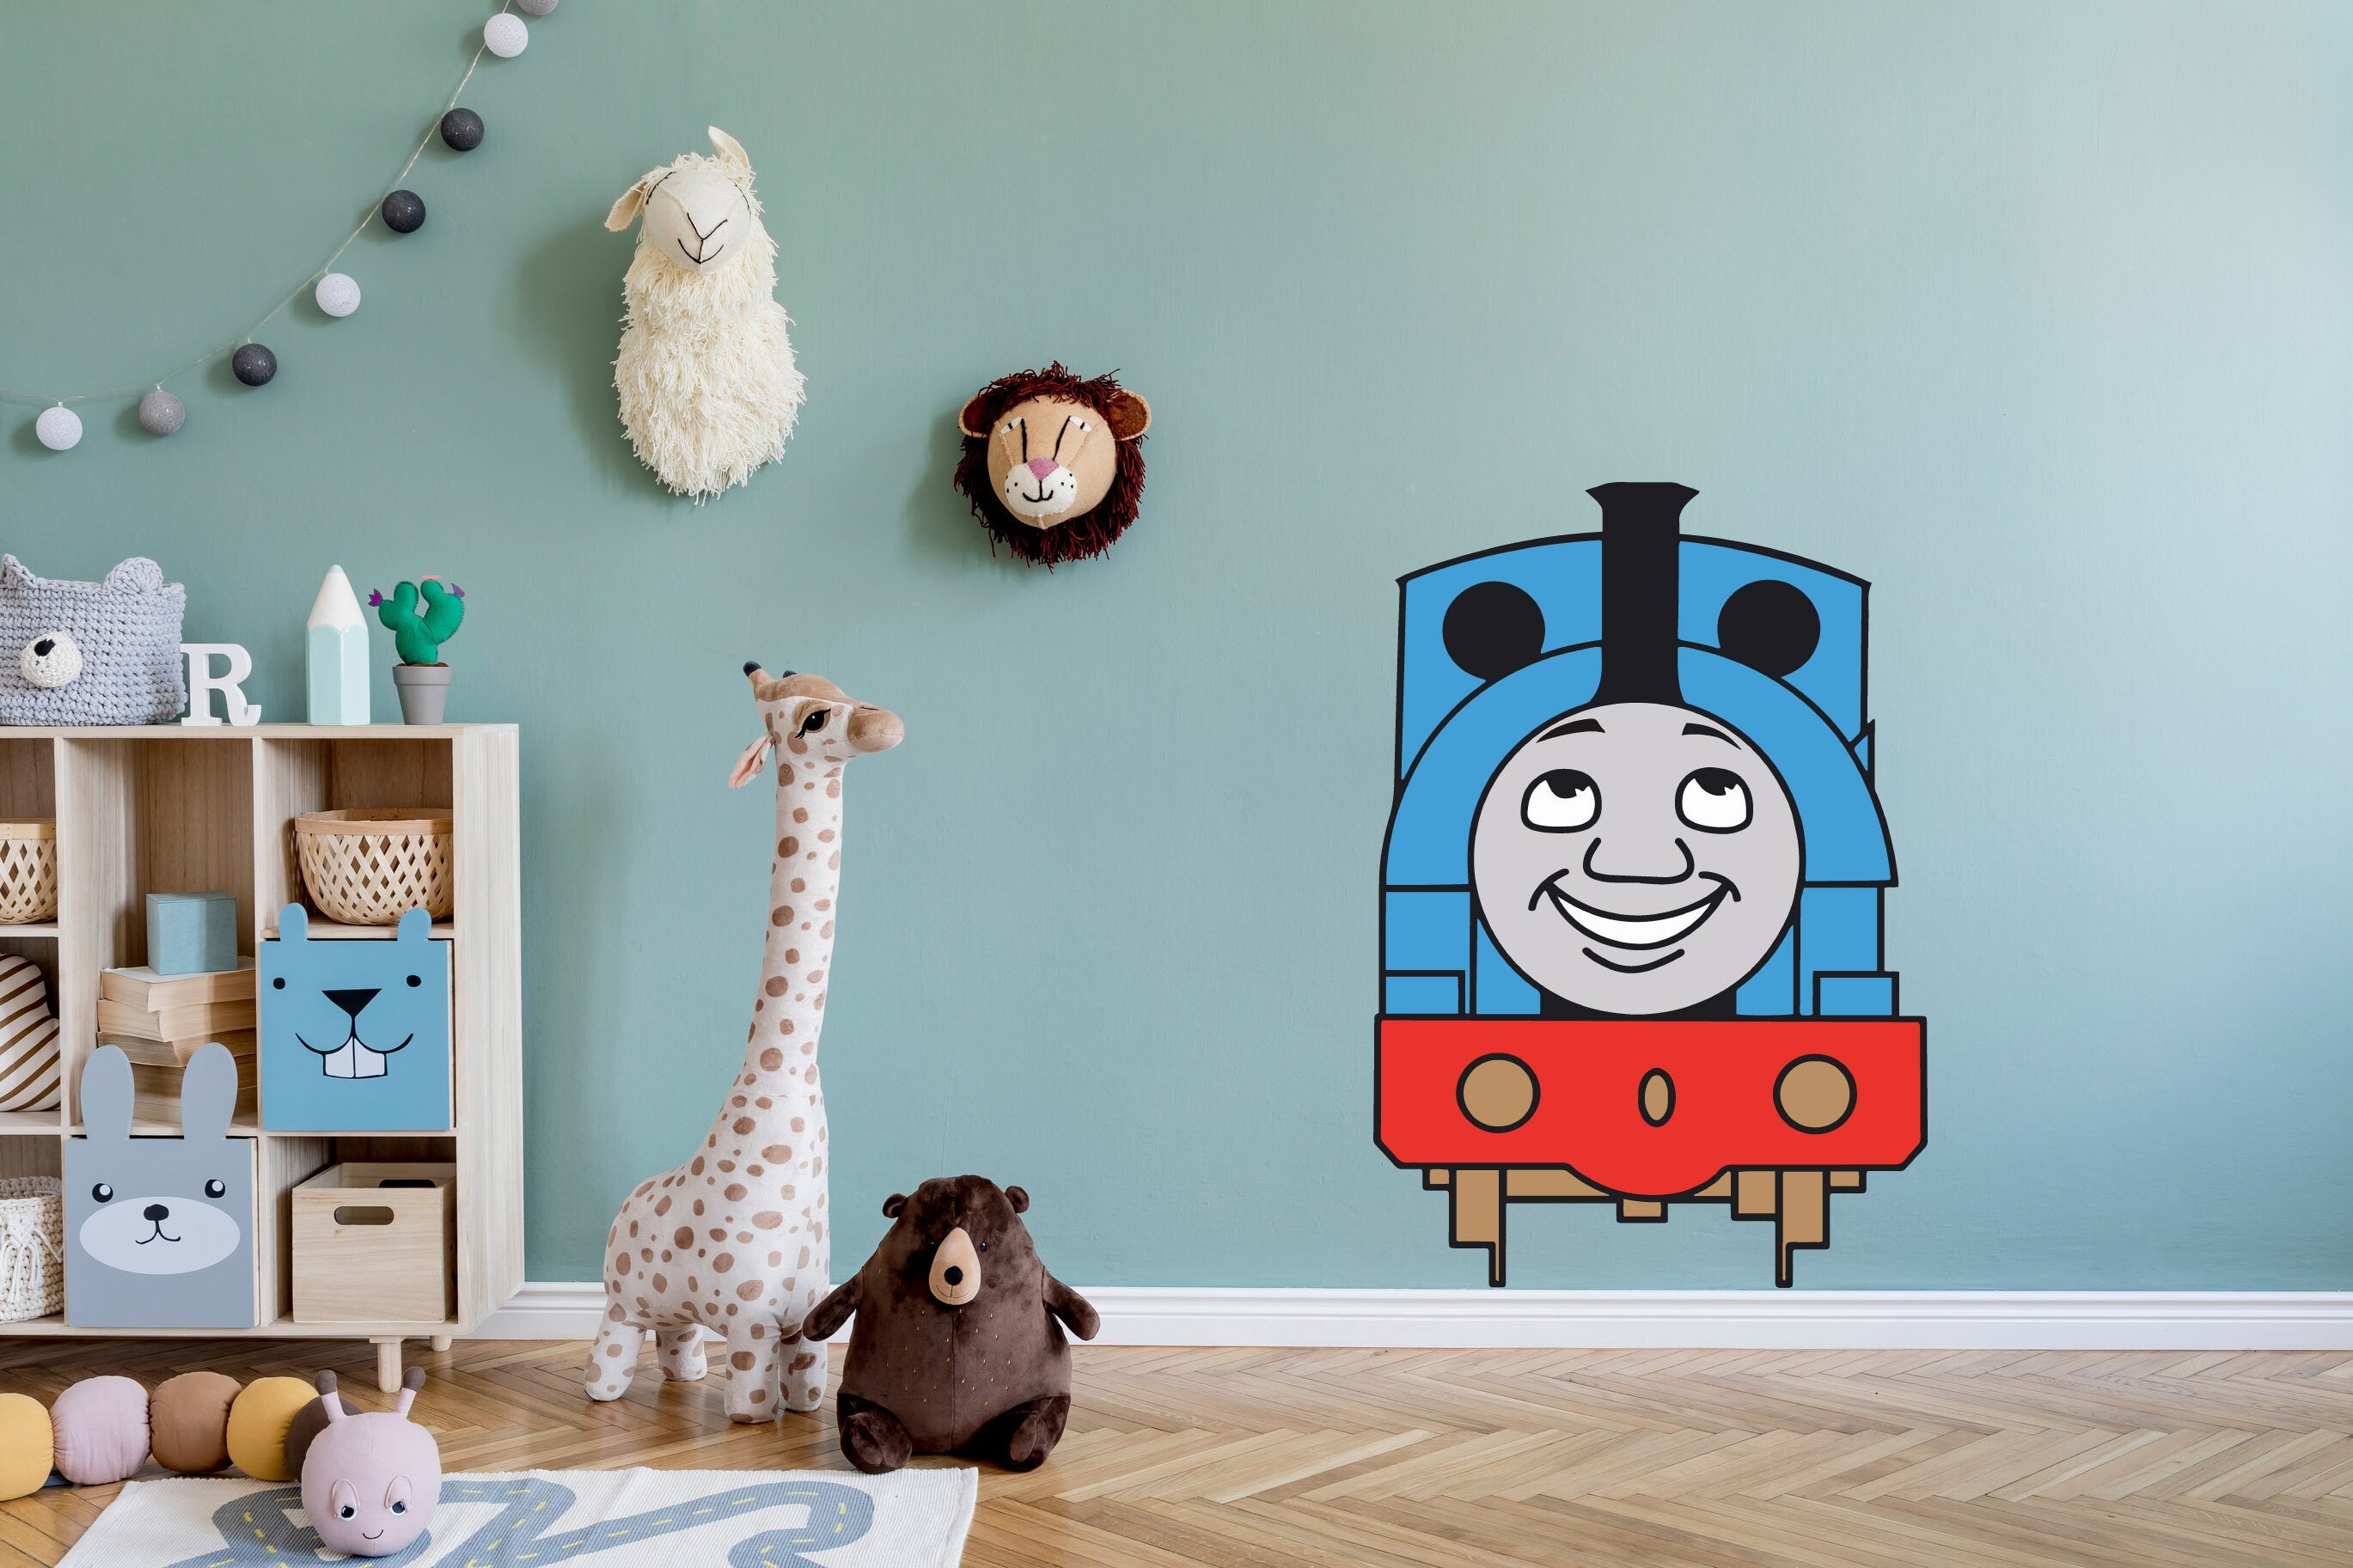 Thomas the Tank Engine Decal for Kids Room, Soft Fabric Decal, Peel-N-Stick Decal, Removable Anytime